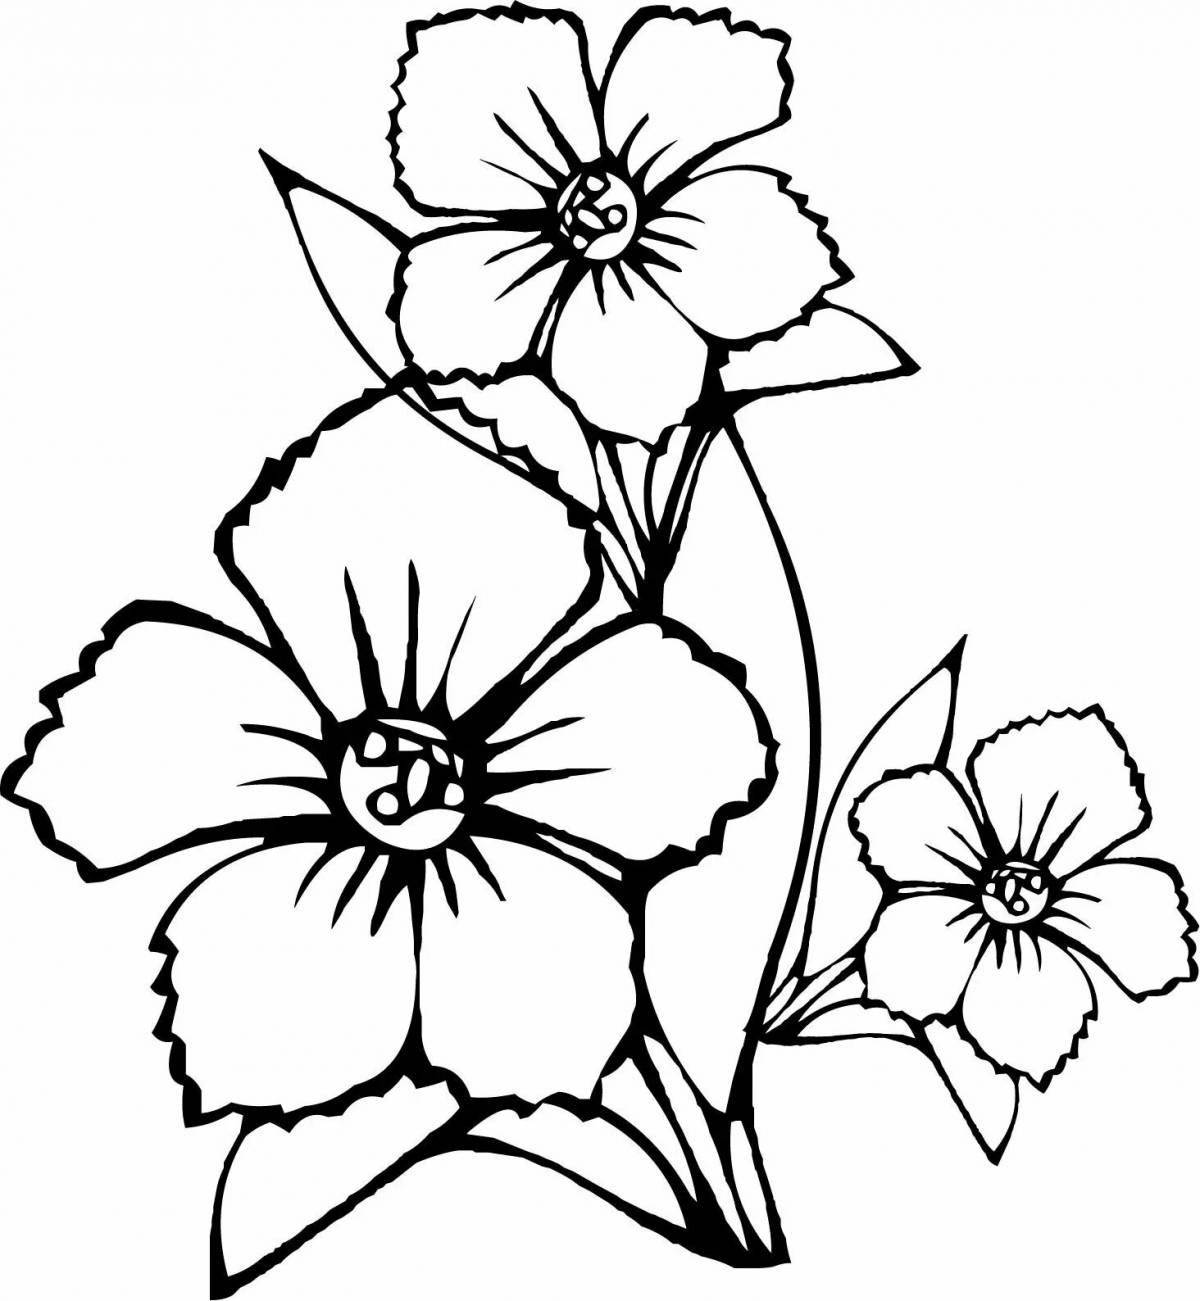 Fancy coloring flower drawing